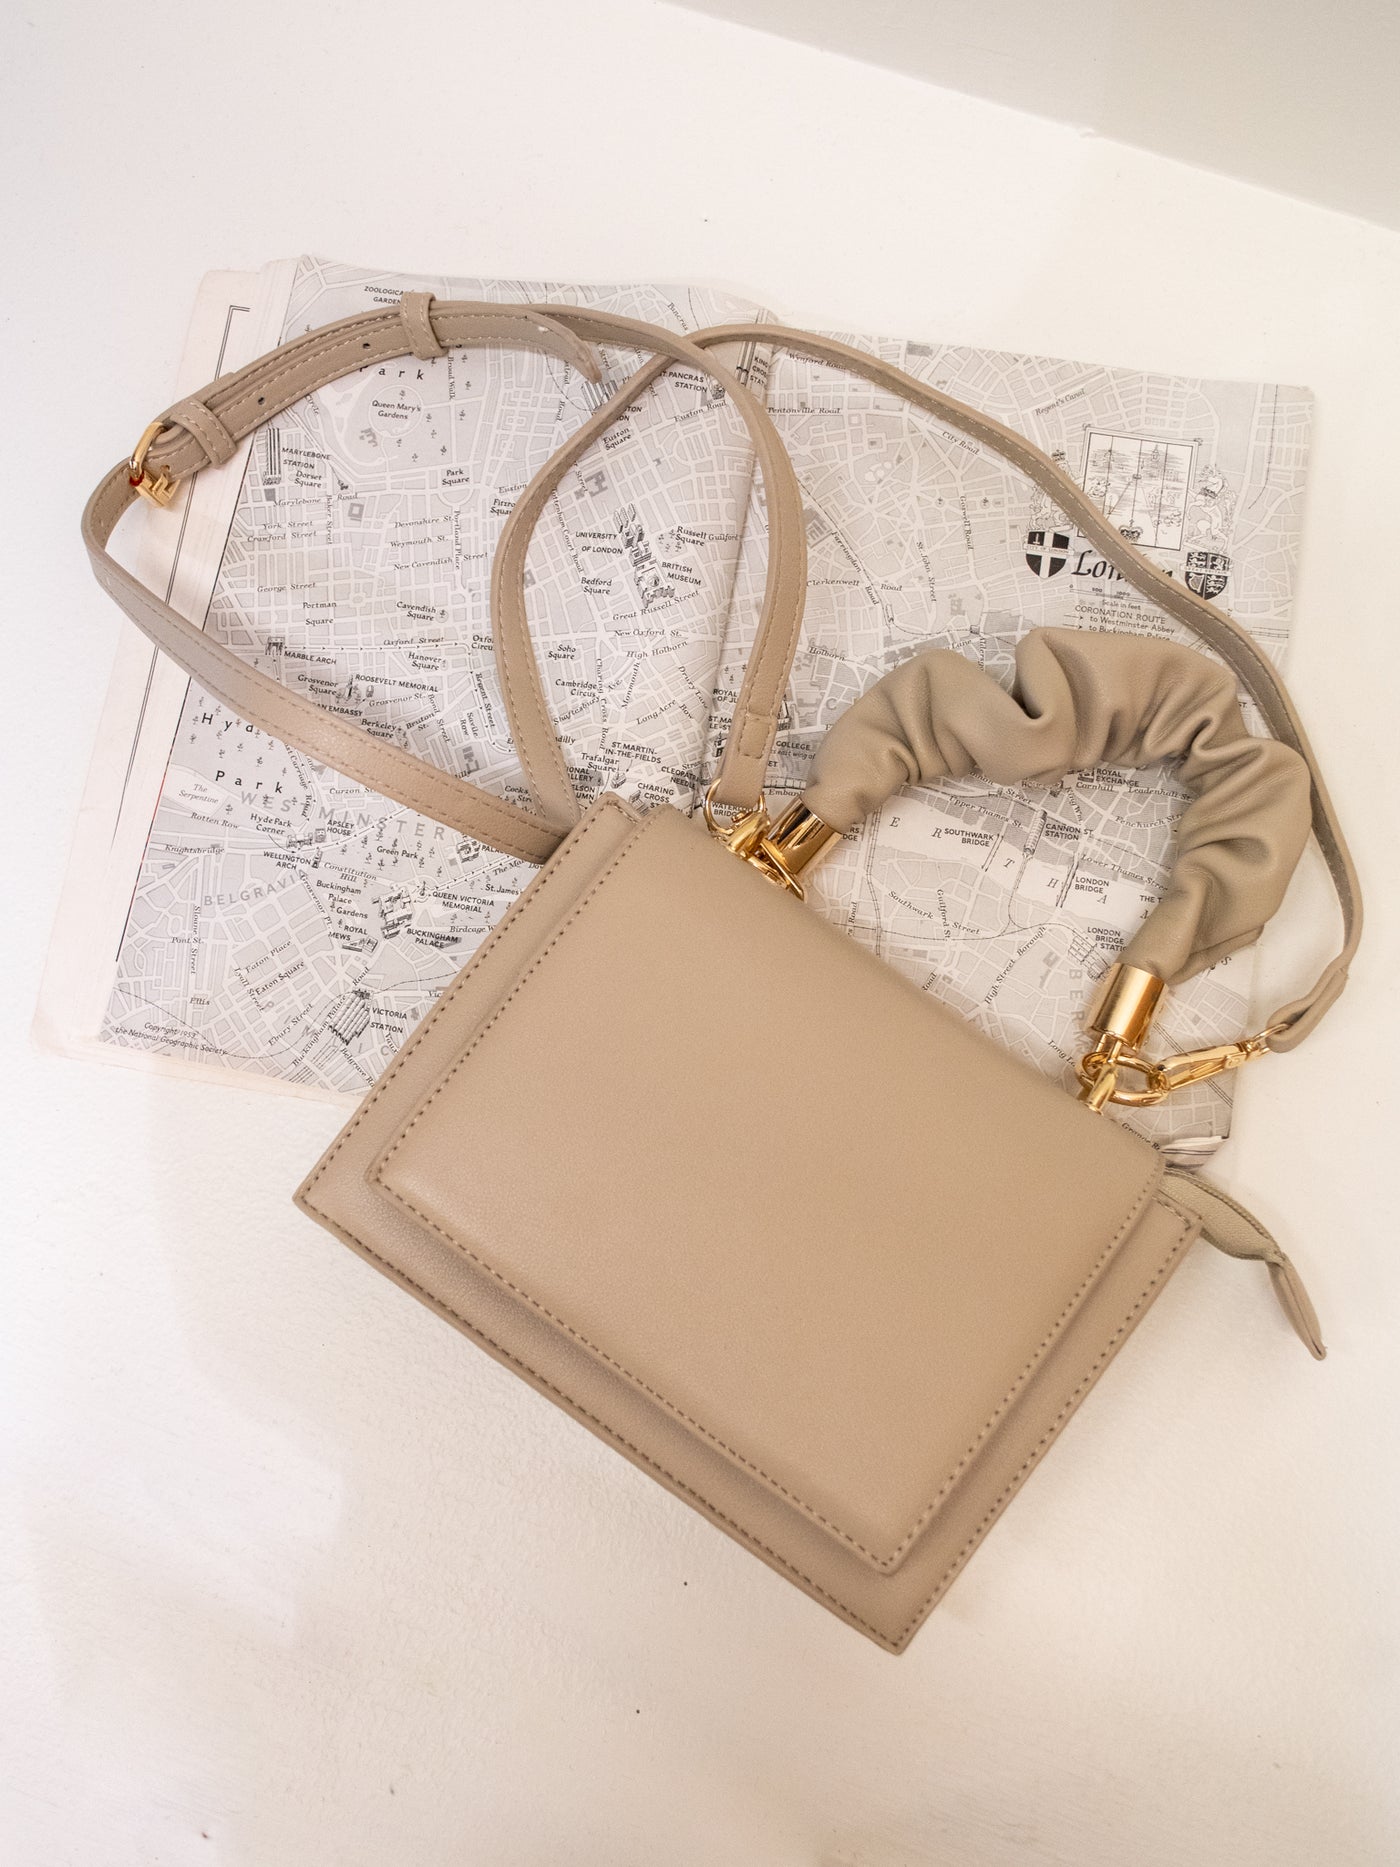 A cream purse with a top handle and a removable/ adjustable crossbody strap that has a magnetic closure.